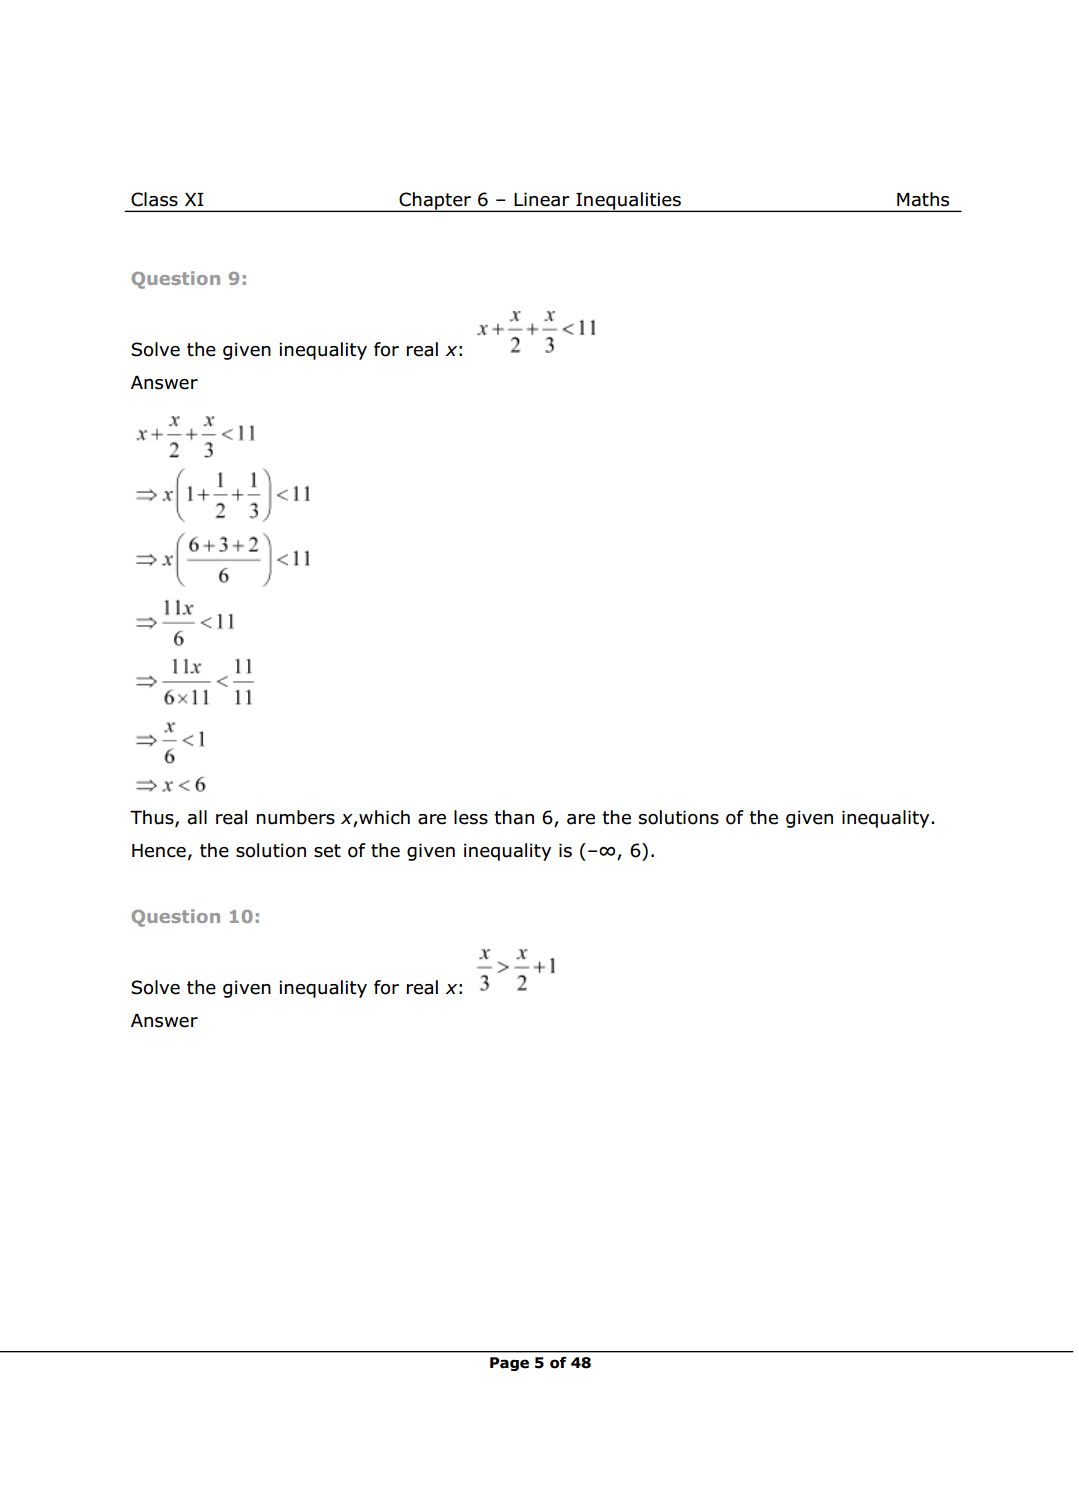 Class 11 Maths Chapter 6 Exercise 6.1 Solutions Image 5